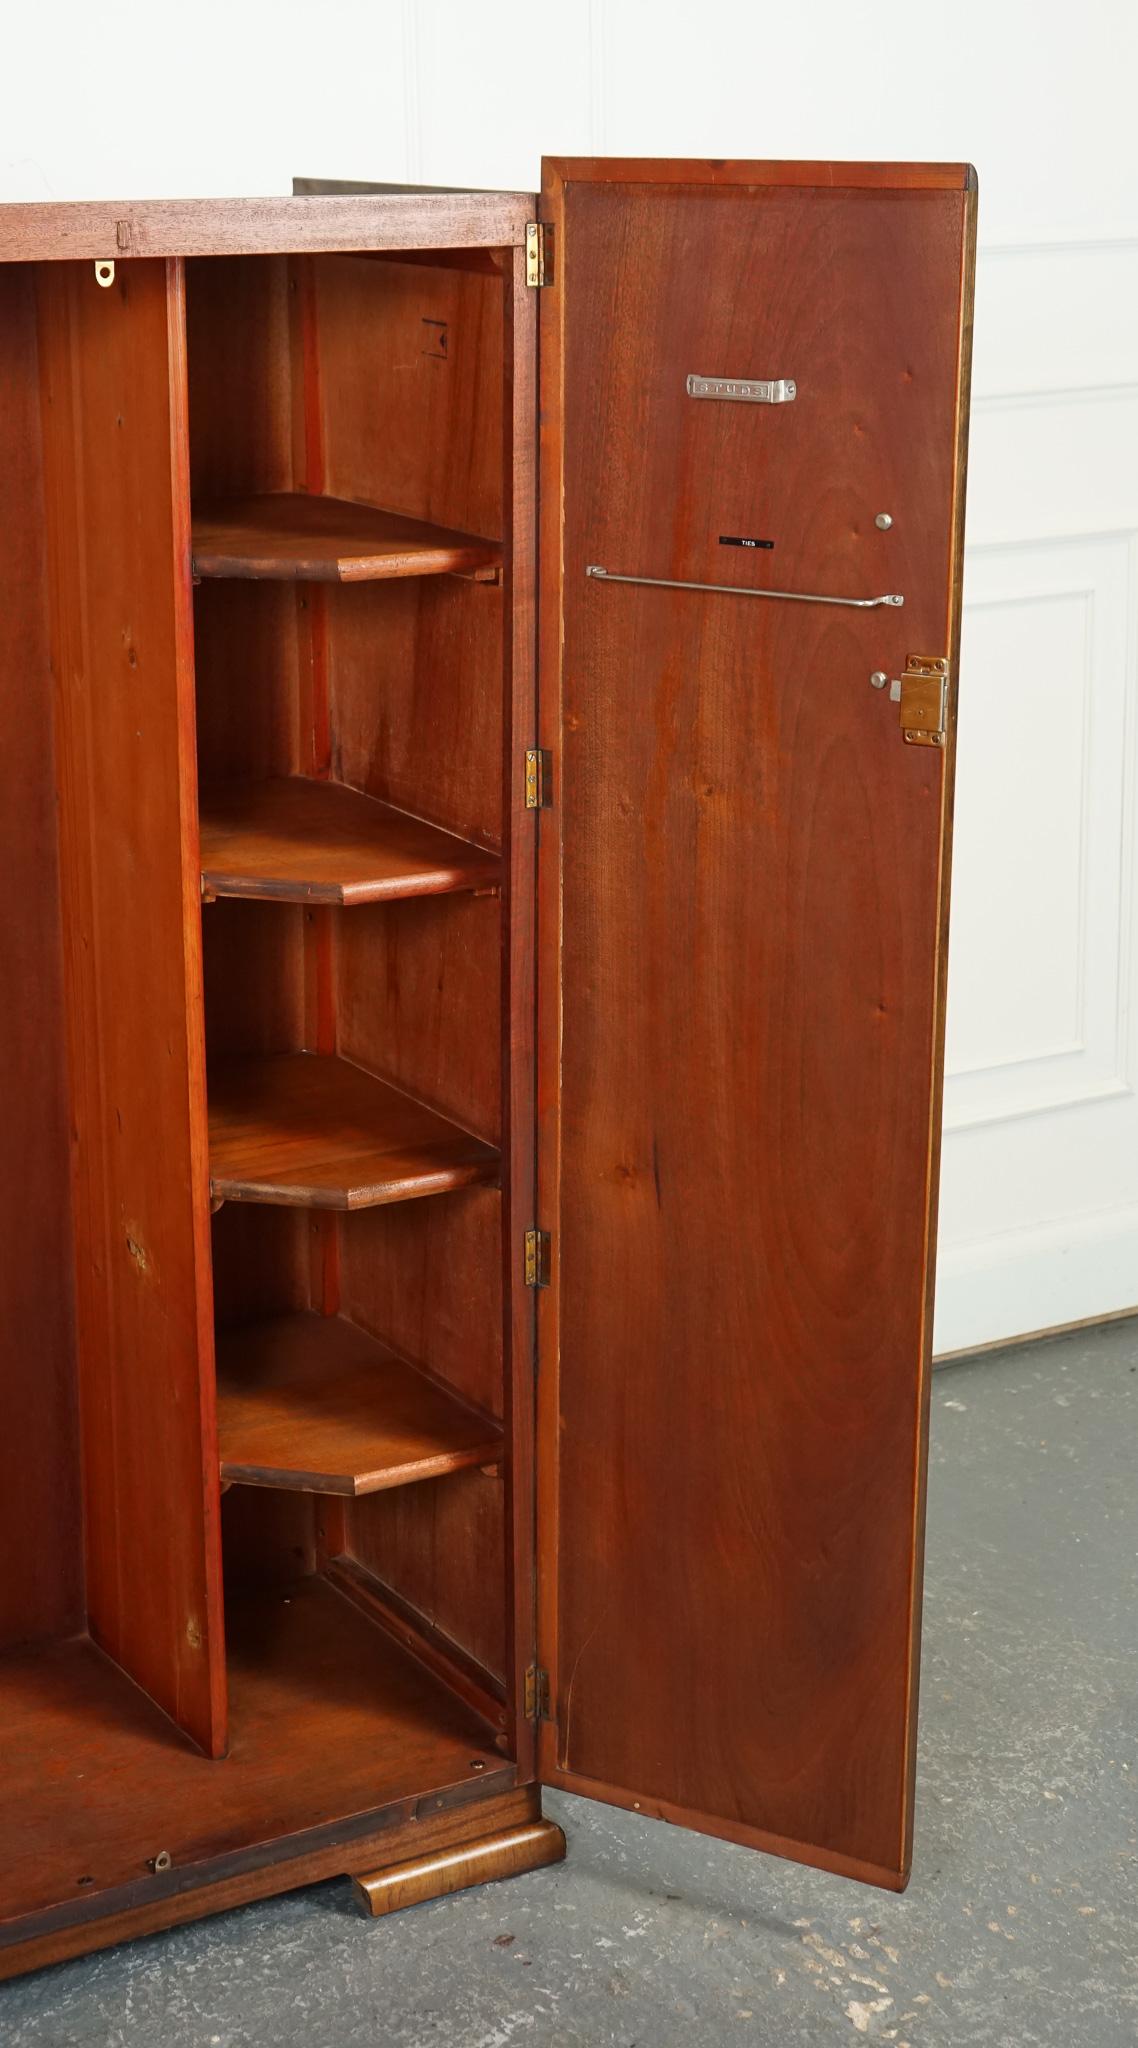 LOVELY SMALL COMPACT ART DECO BURR WALNuT WARDROBE For Sale 3